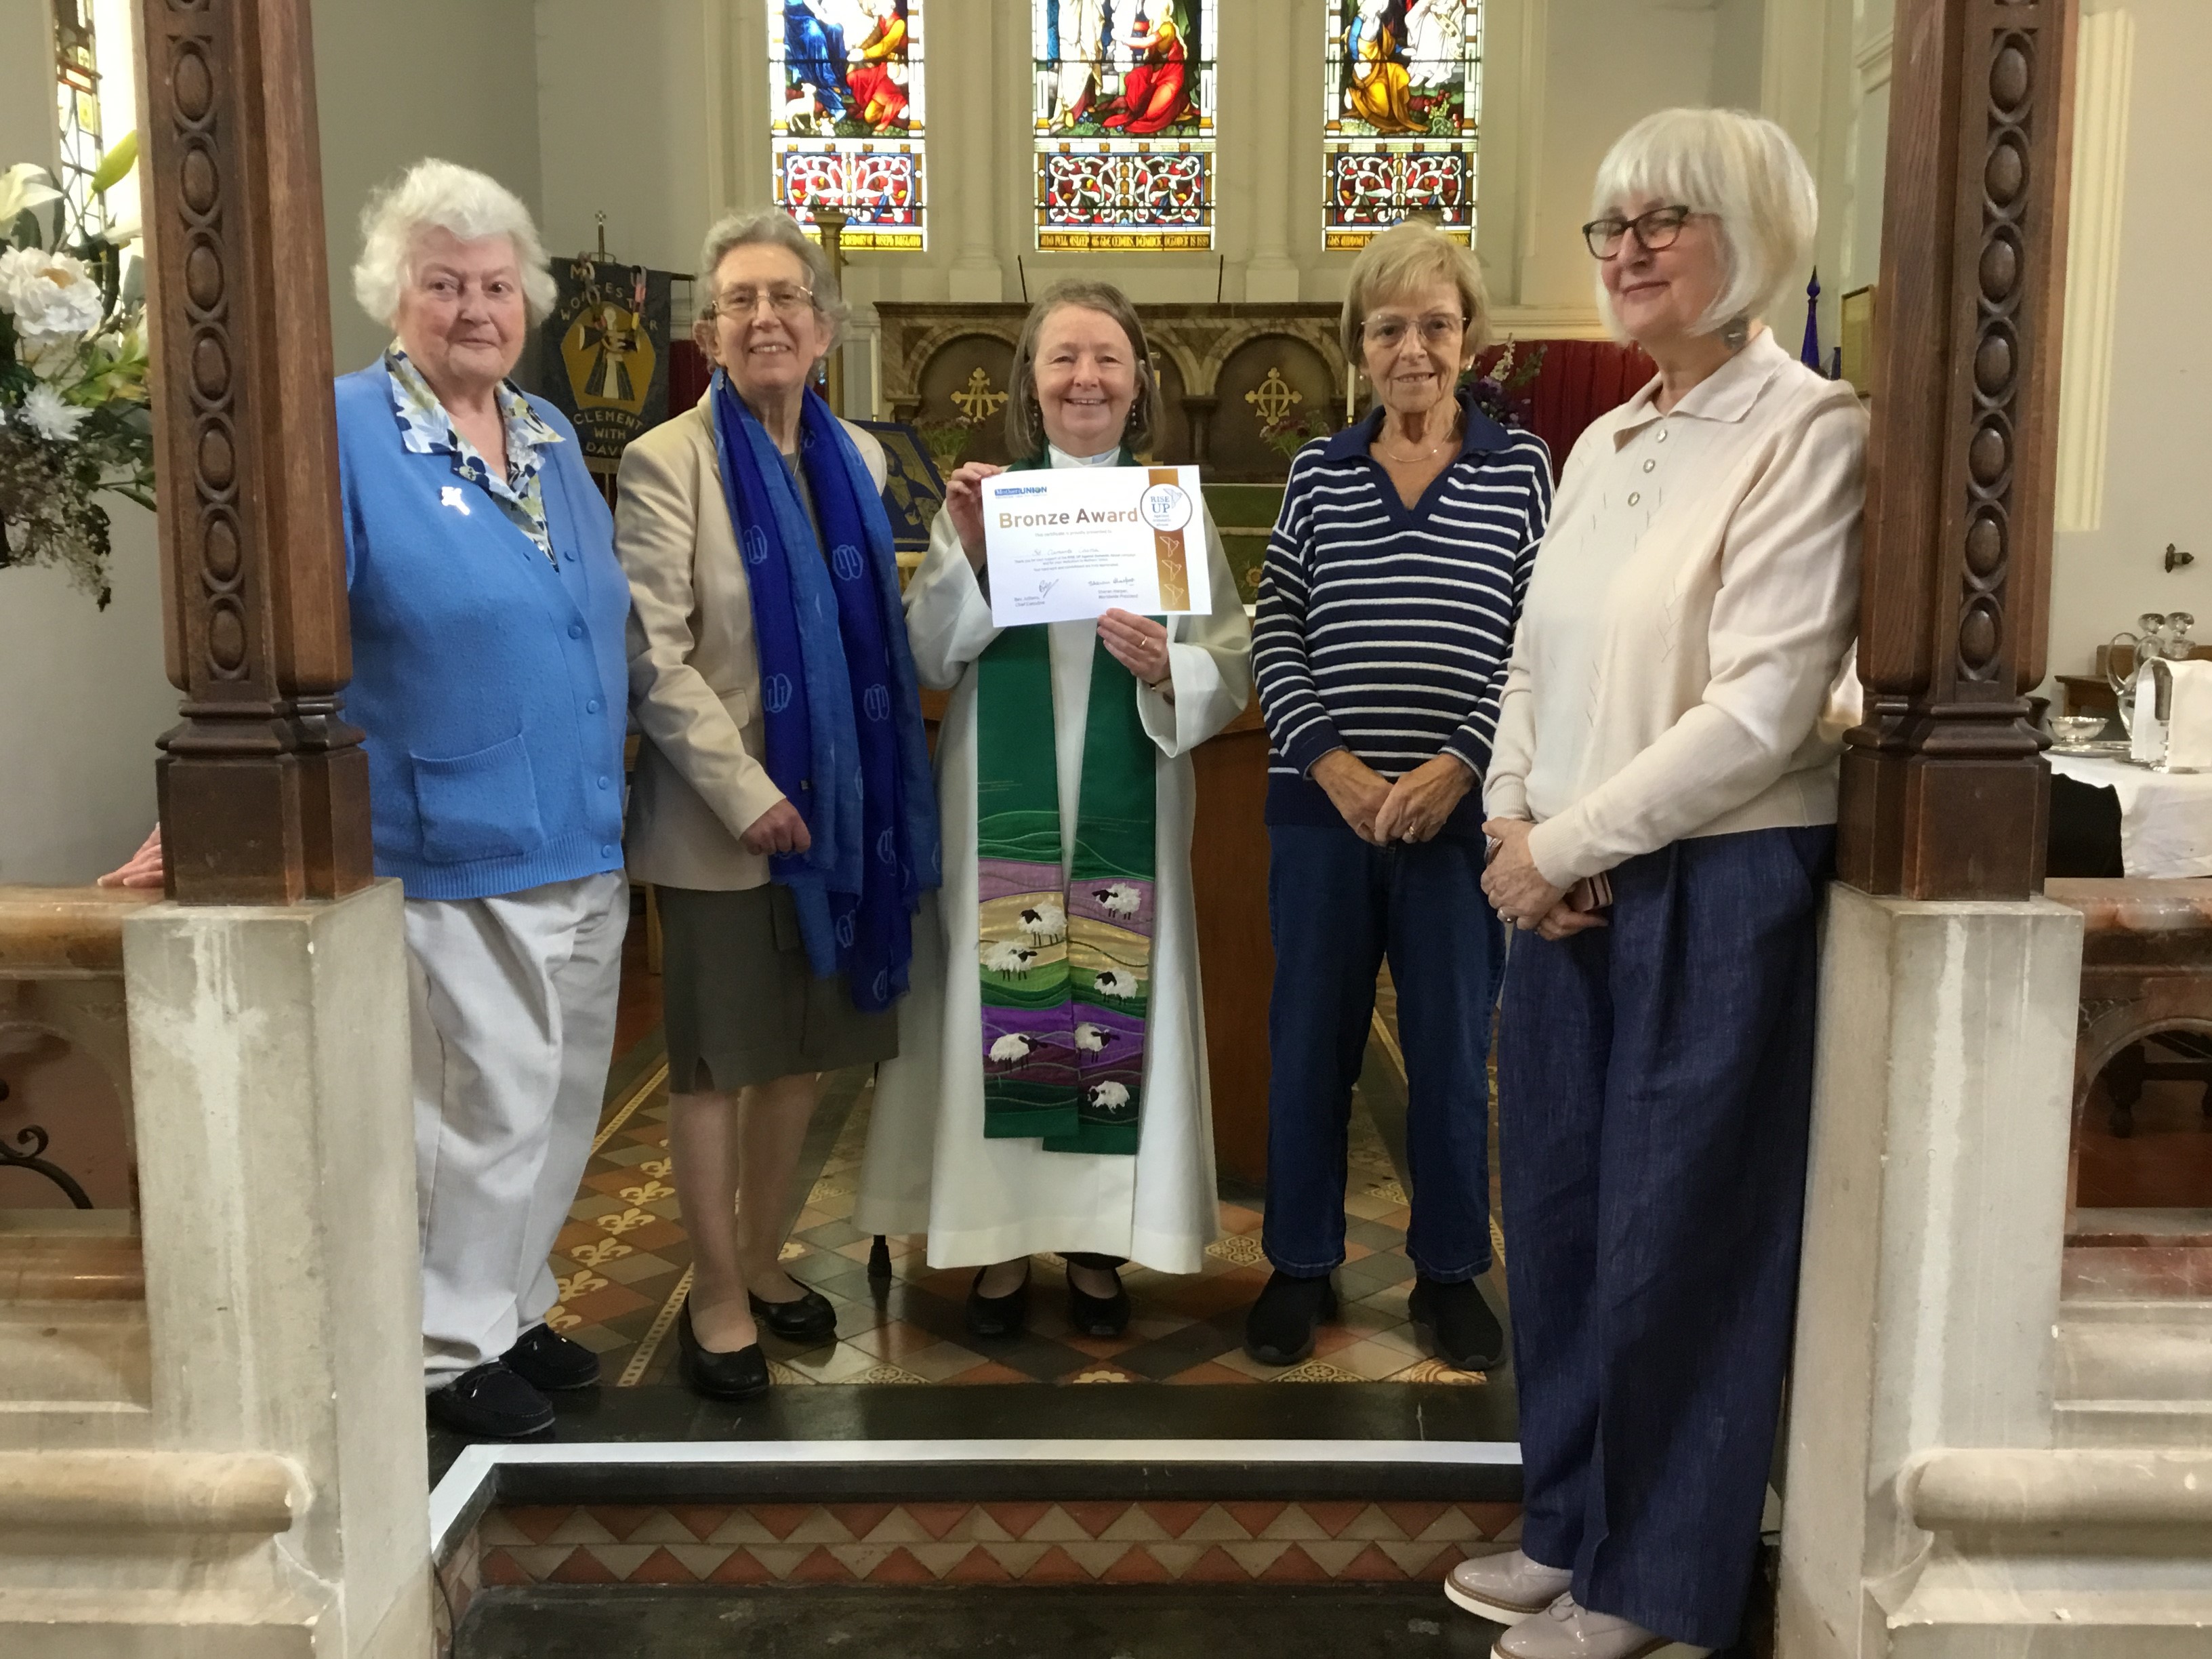 Vicar Sarah Cotrill receives the Rise up award from the MU